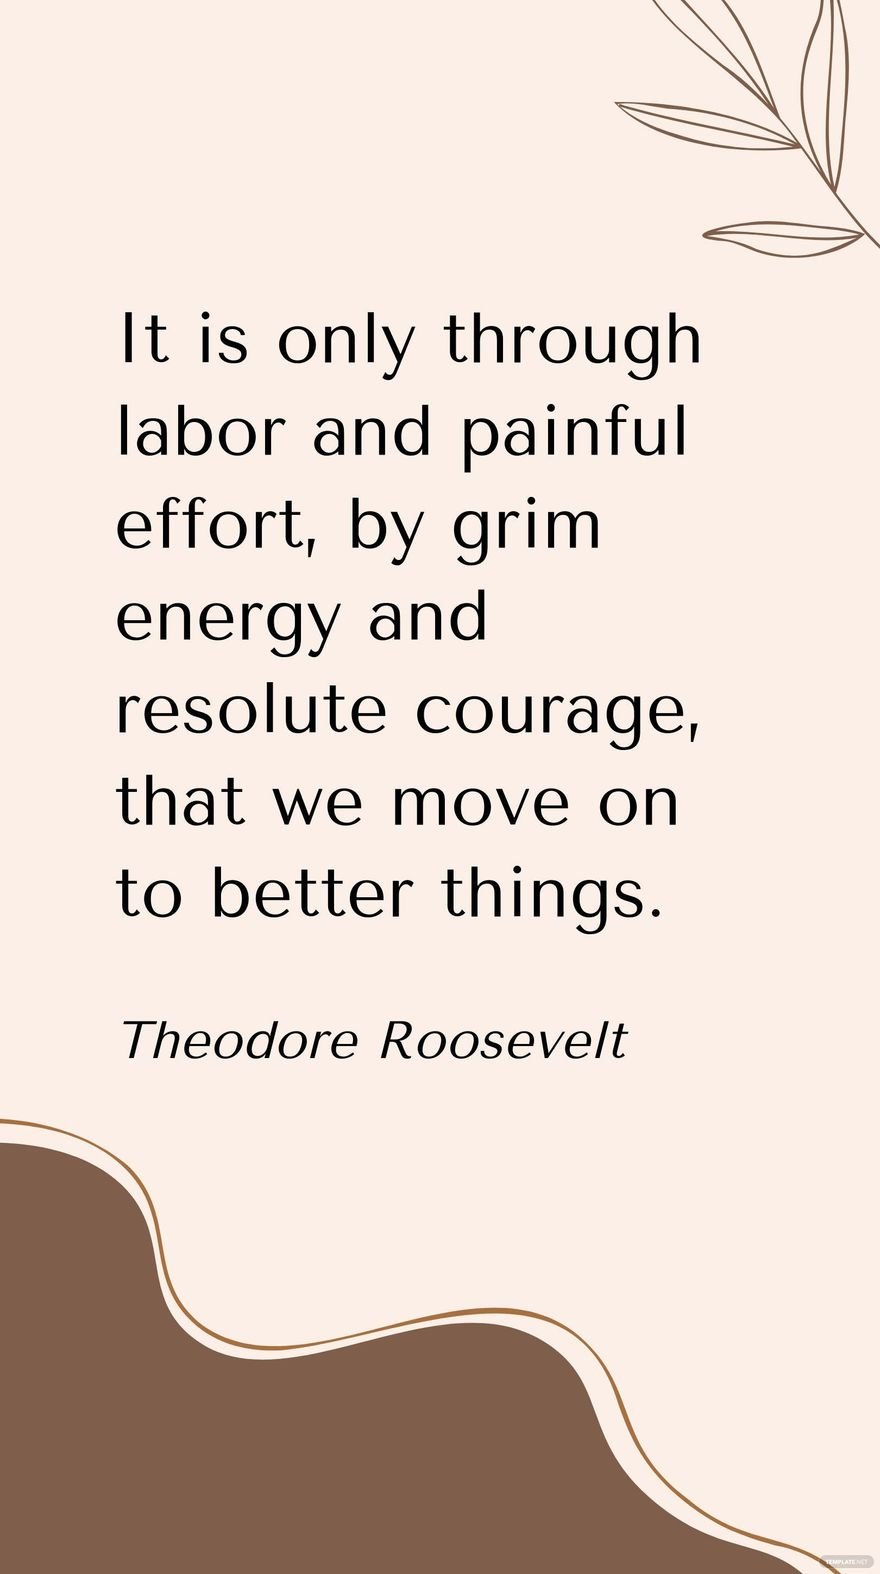 Theodore Roosevelt - It is only through labor and painful effort, by grim energy and resolute courage, that we move on to better things.